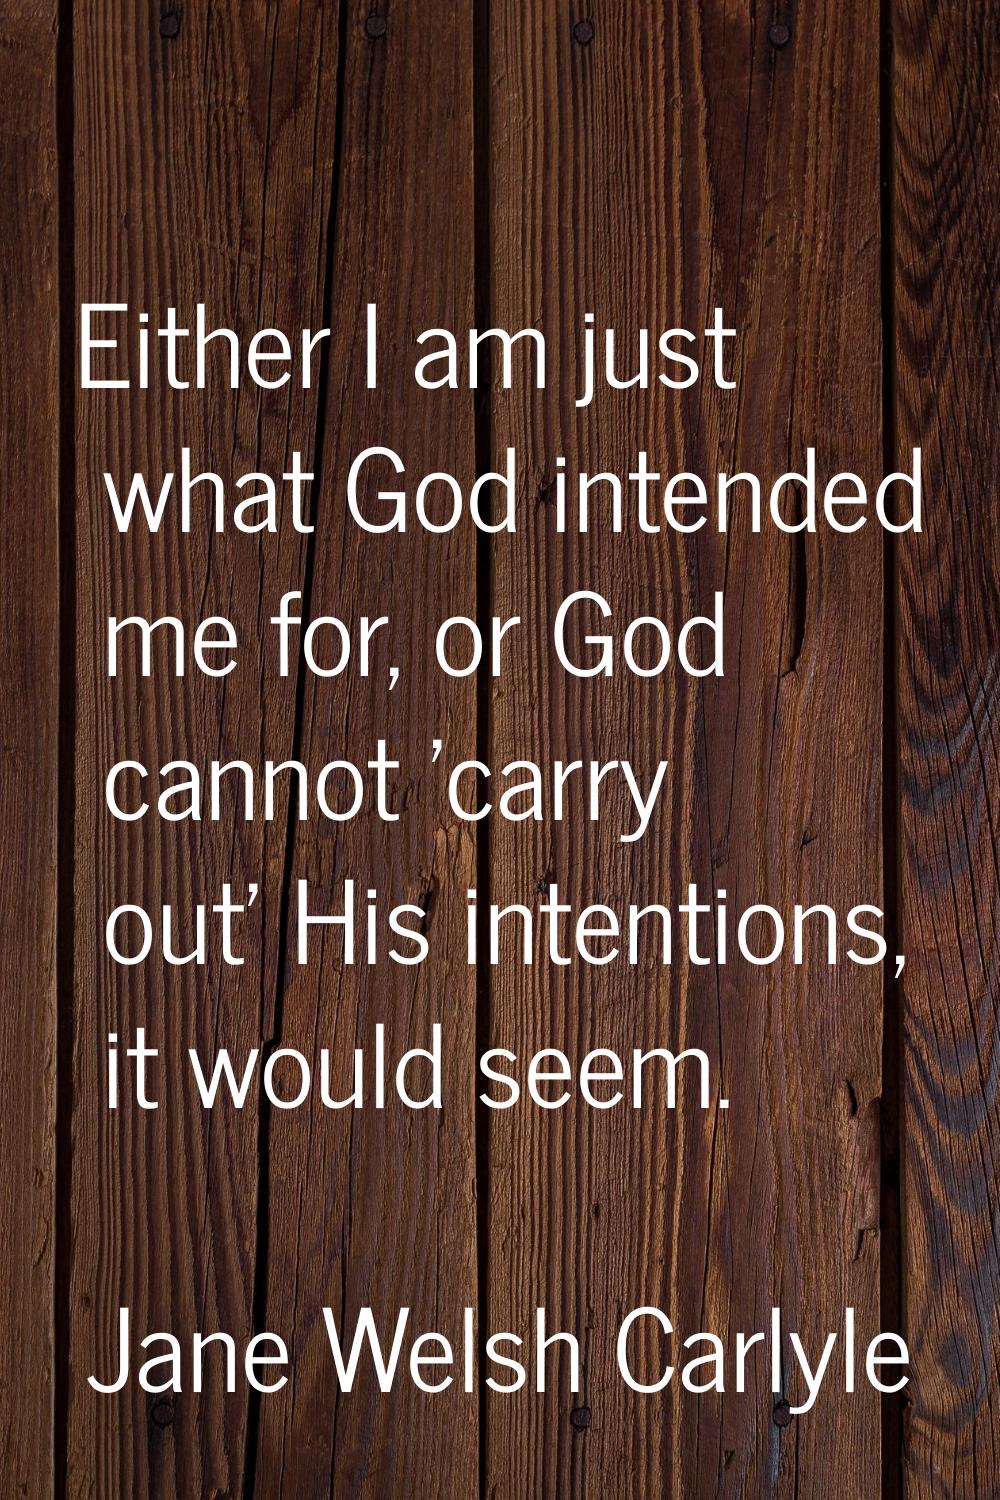 Either I am just what God intended me for, or God cannot 'carry out' His intentions, it would seem.